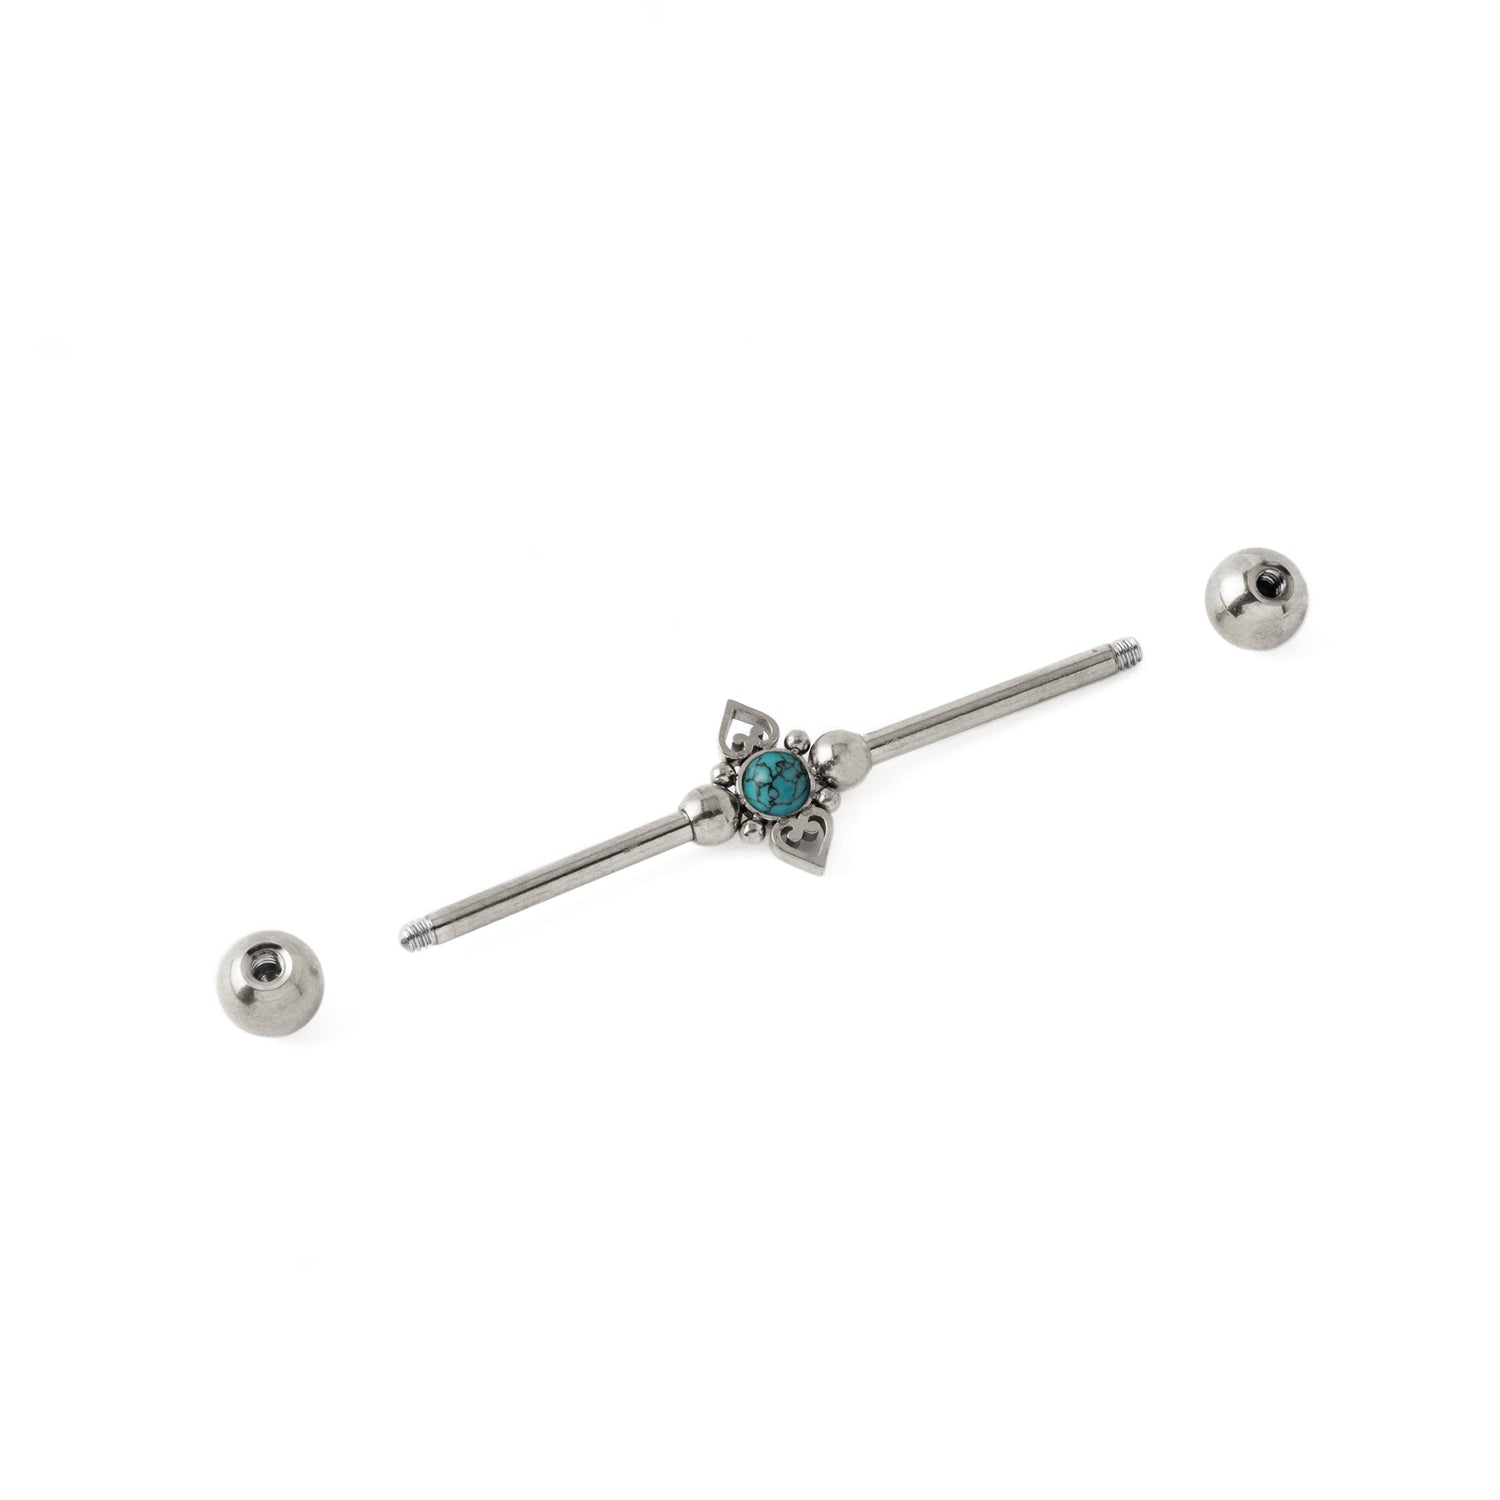 Neptune Industrial Bar with Turquoise externally threaded closure view